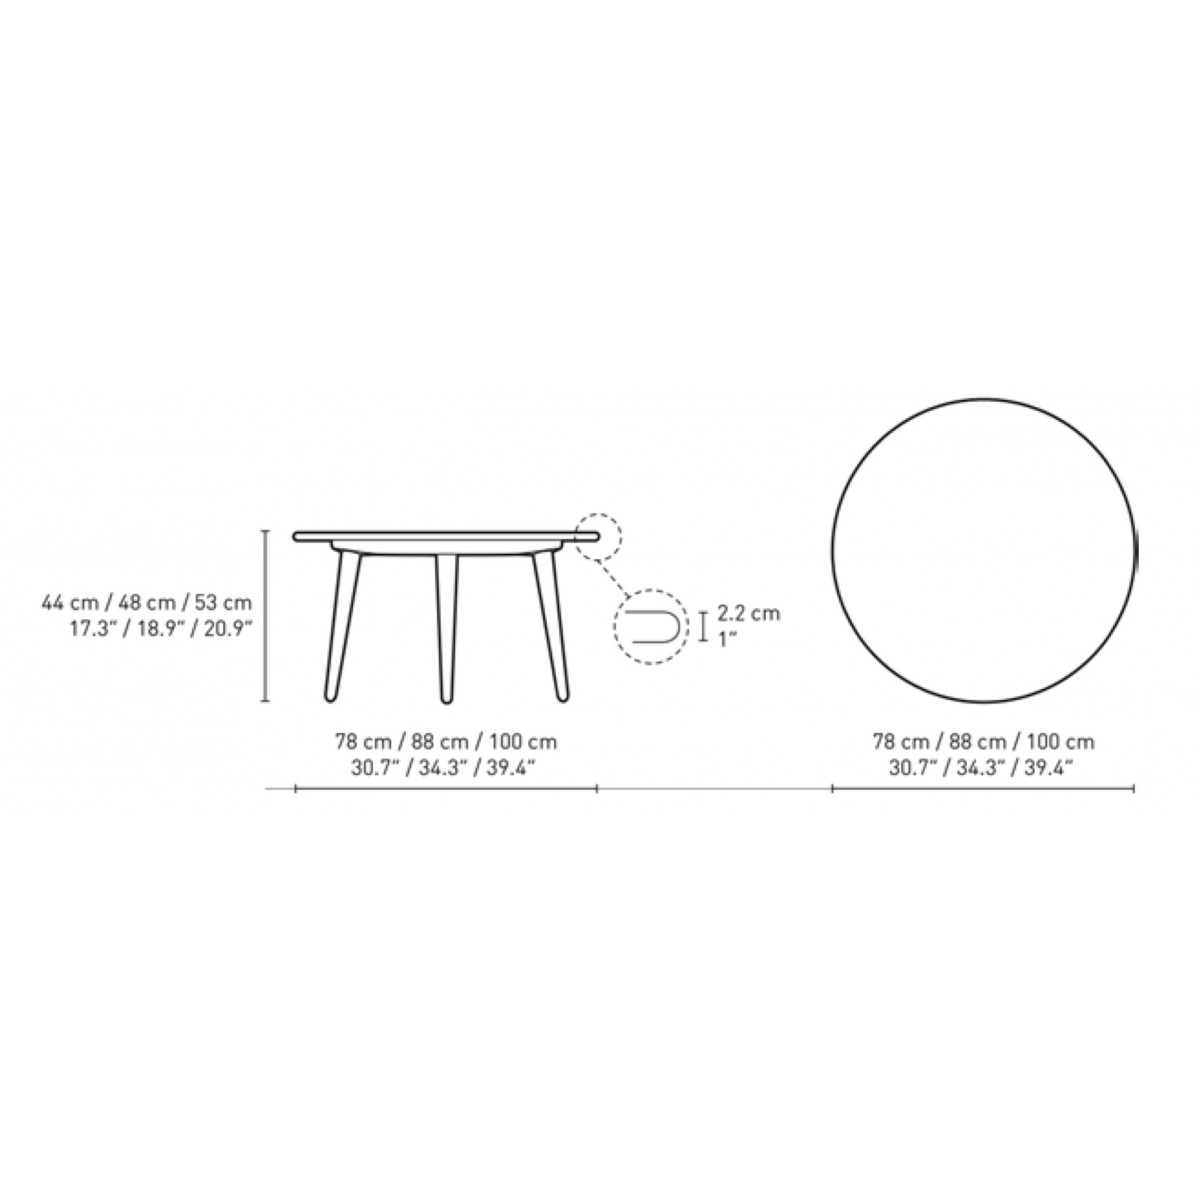 Tabletop Ø100 cm (legs not included) – CH008